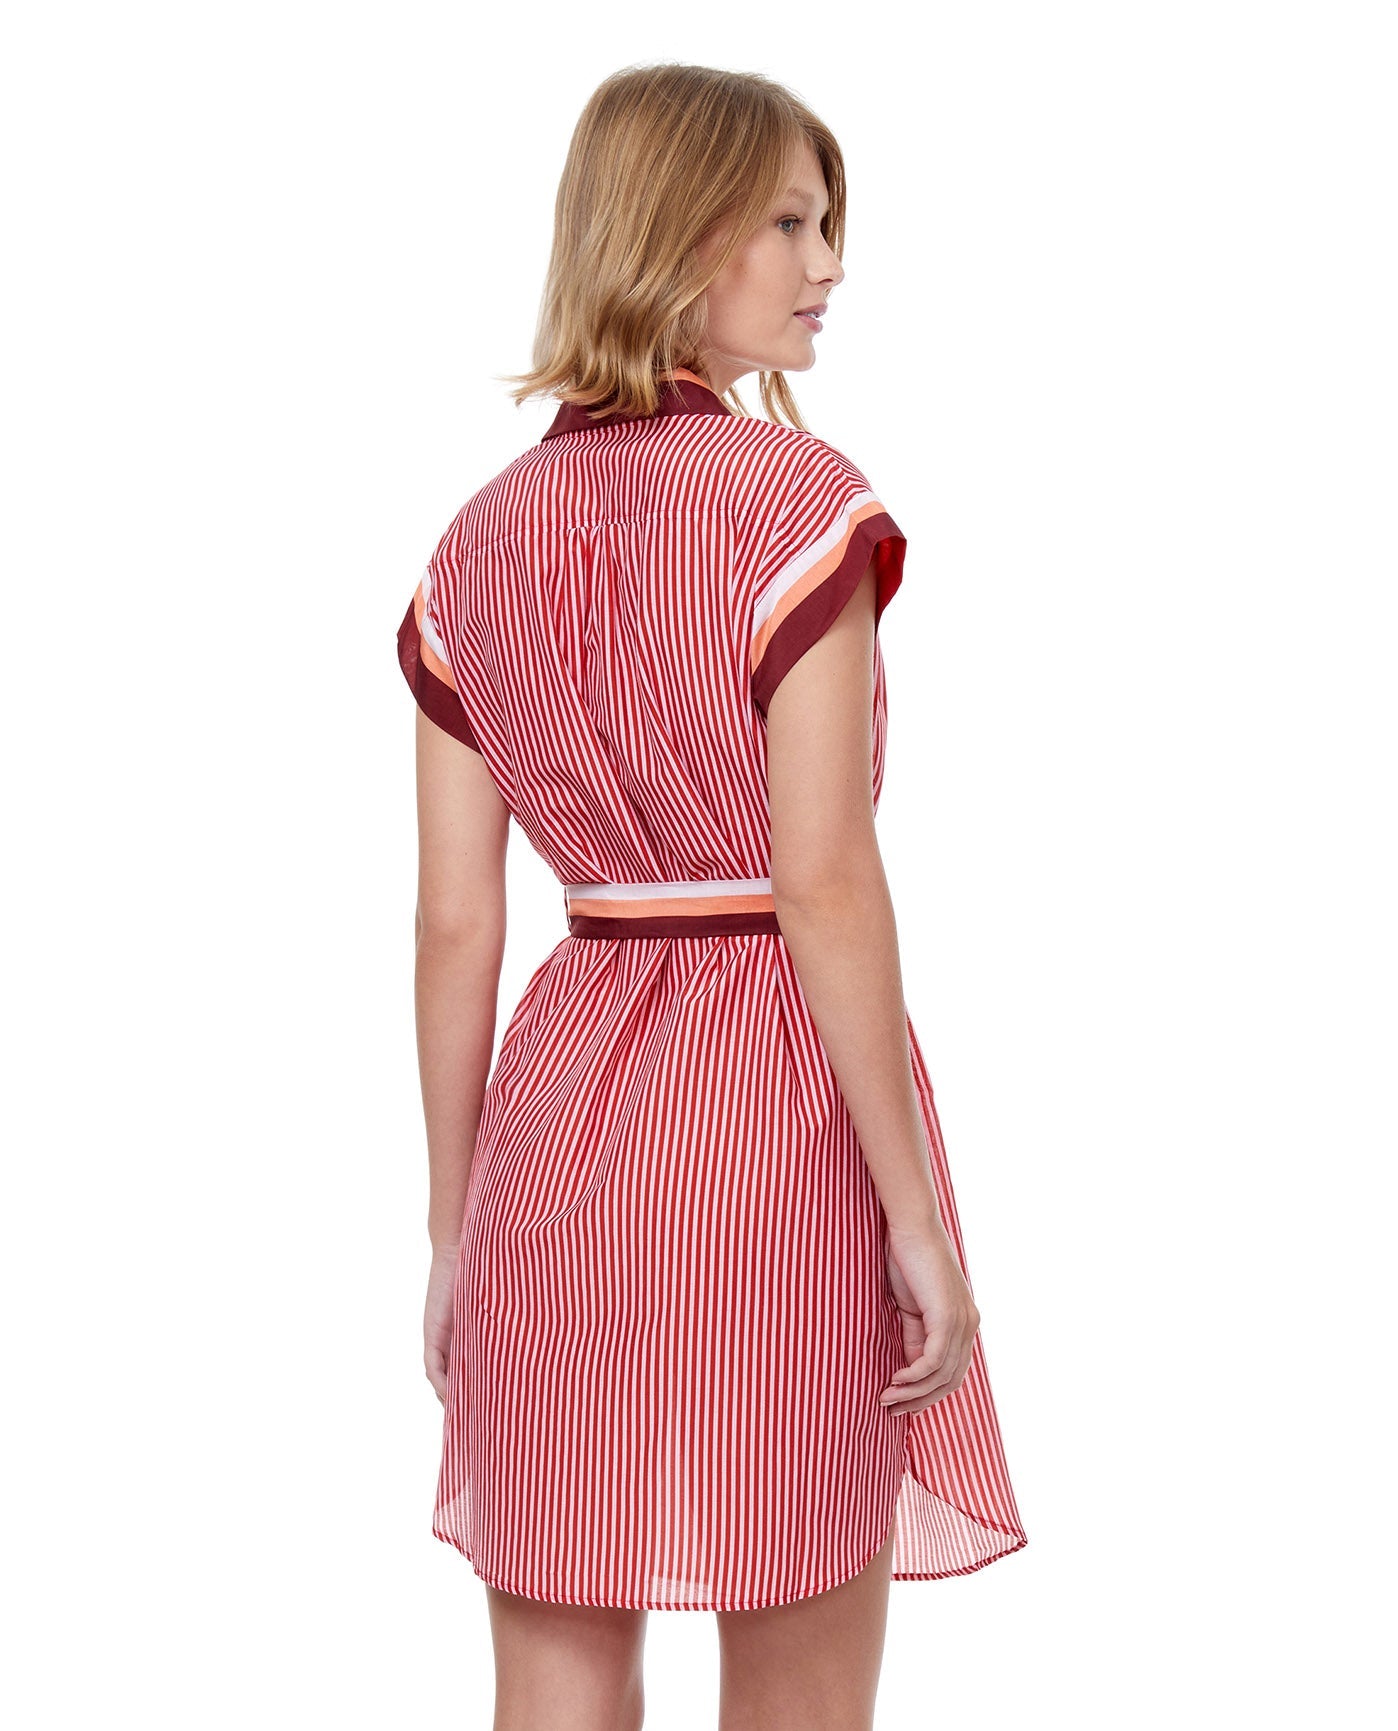 Back View Of Luma Stripes Of Light Cover Up Shirt Dress With Tie | LUMA STRIPES OF LIGHT PEACH